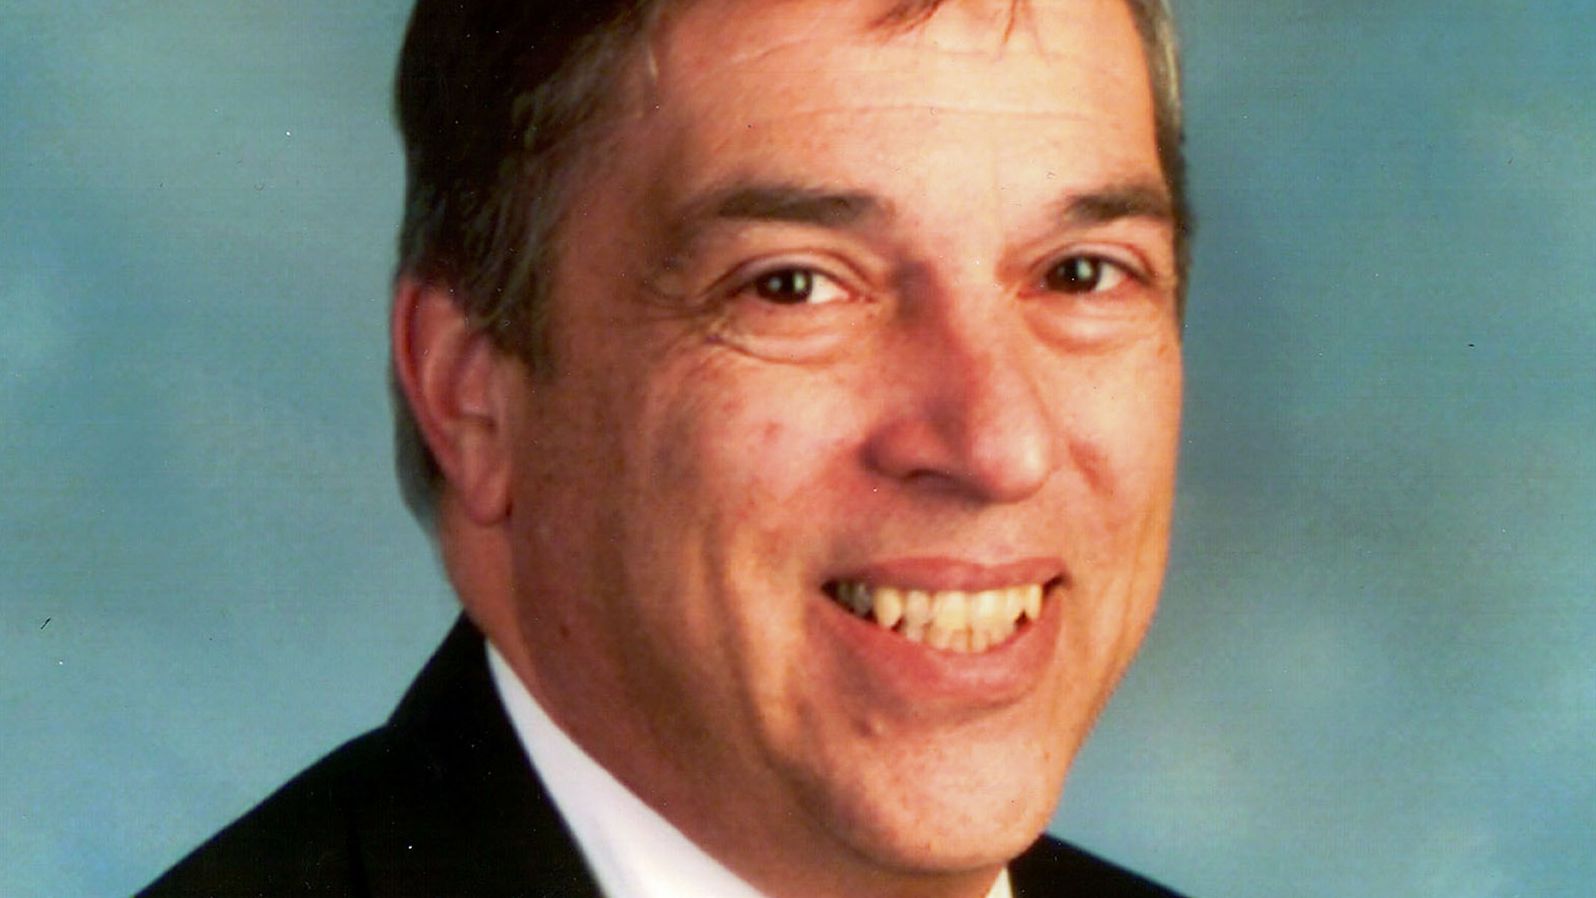 Former FBI agent <a href="http://www.cnn.com/2002/LAW/05/10/hanssen.sentenced/index.html" target="_blank">Robert Hanssen</a> is serving a life sentence without the possibility of parole for his role in spying for the Soviet Union and Russia. He was sentenced in 2002.